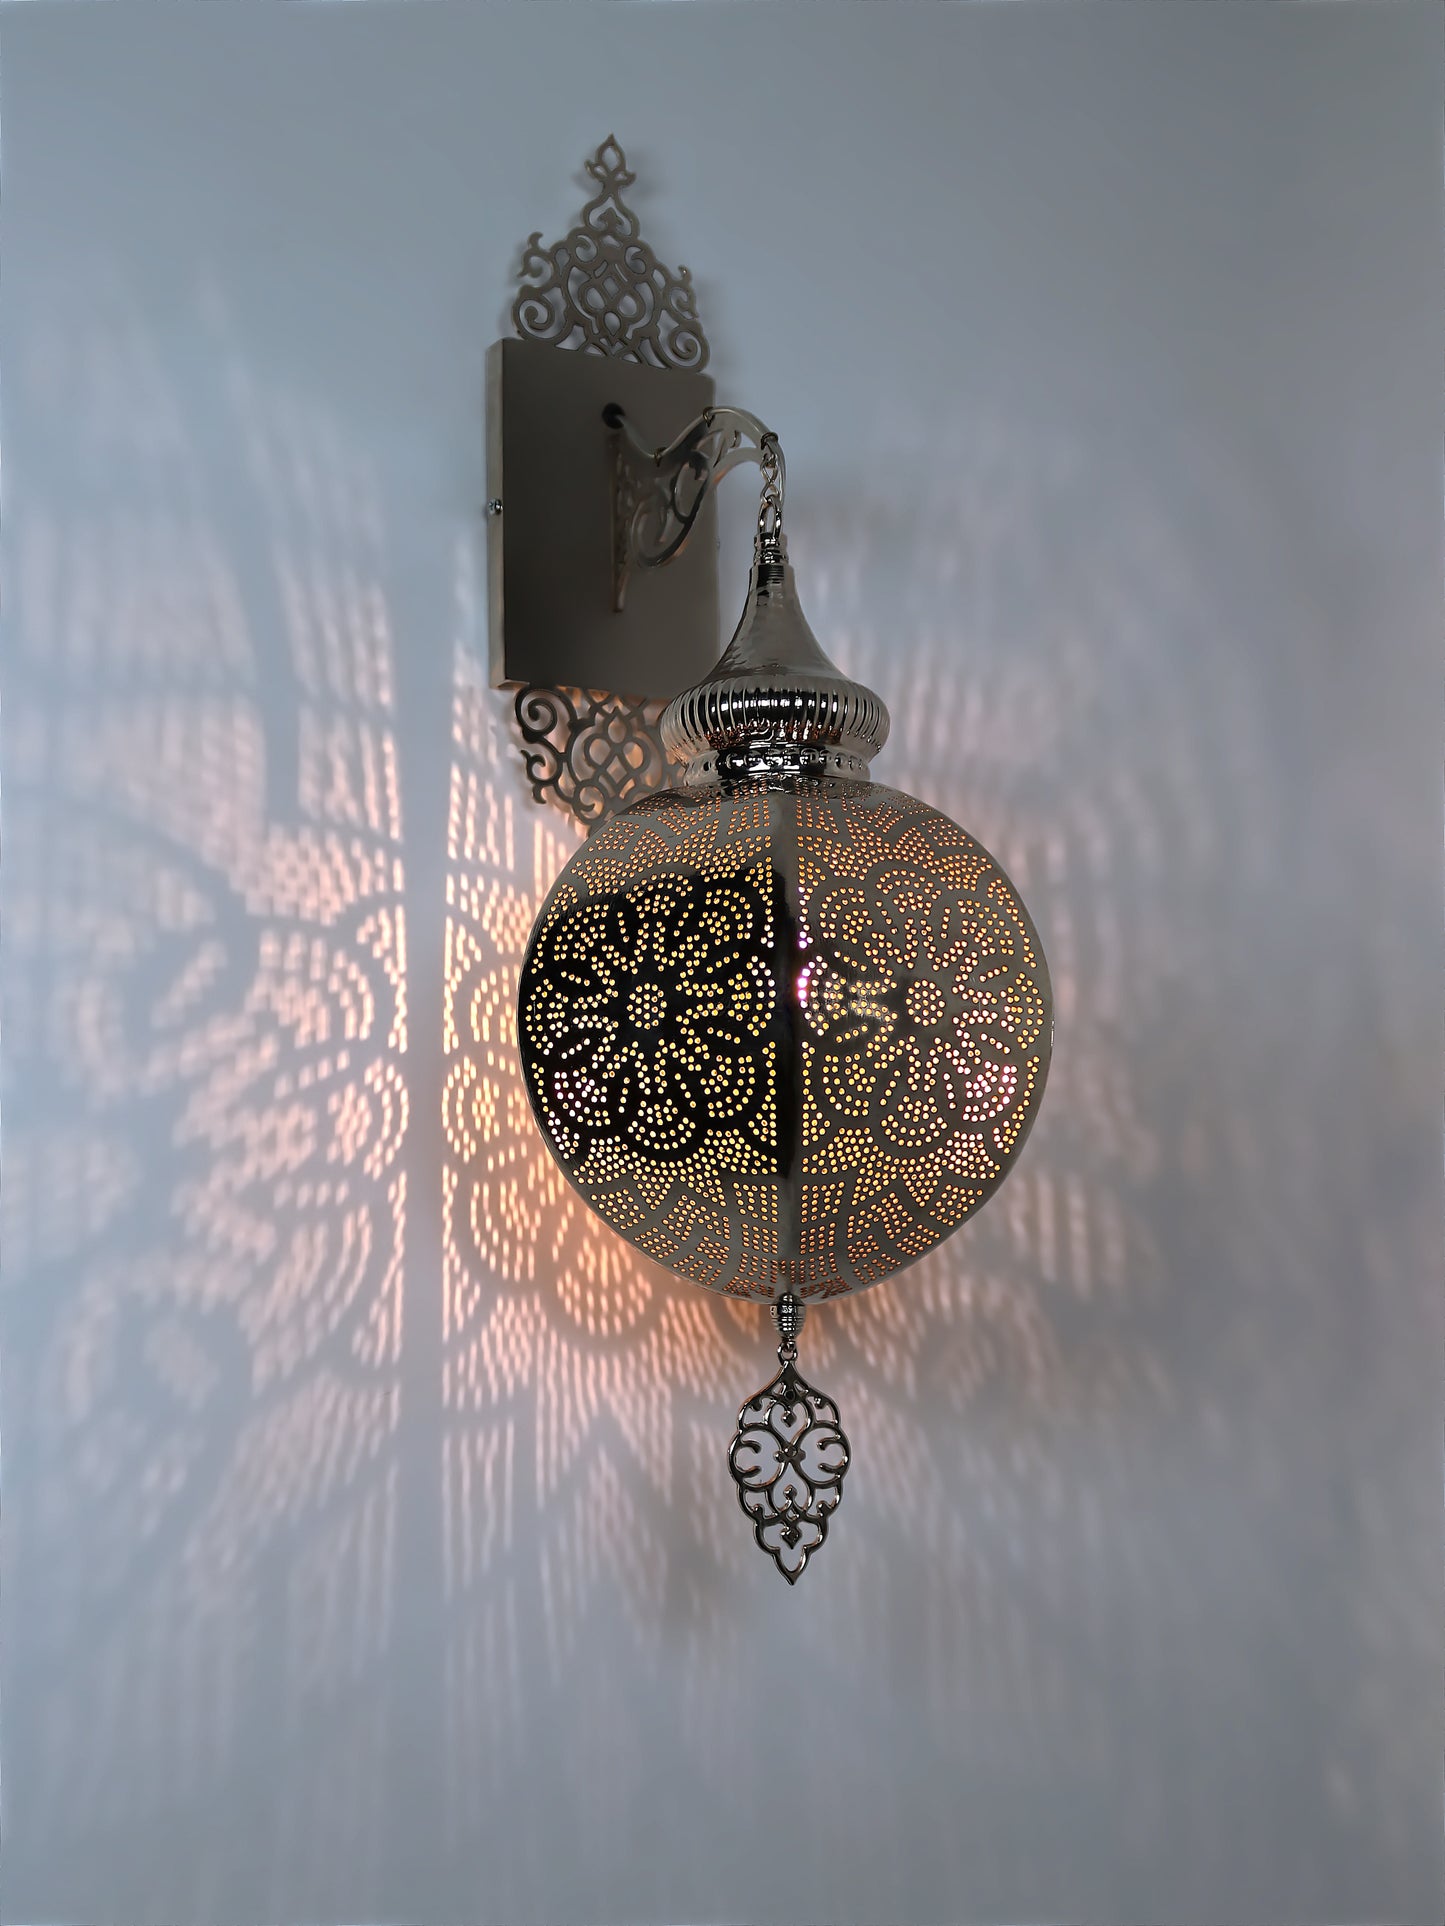 Moroccan Style Wall Lights Turkish Lamp Sconce